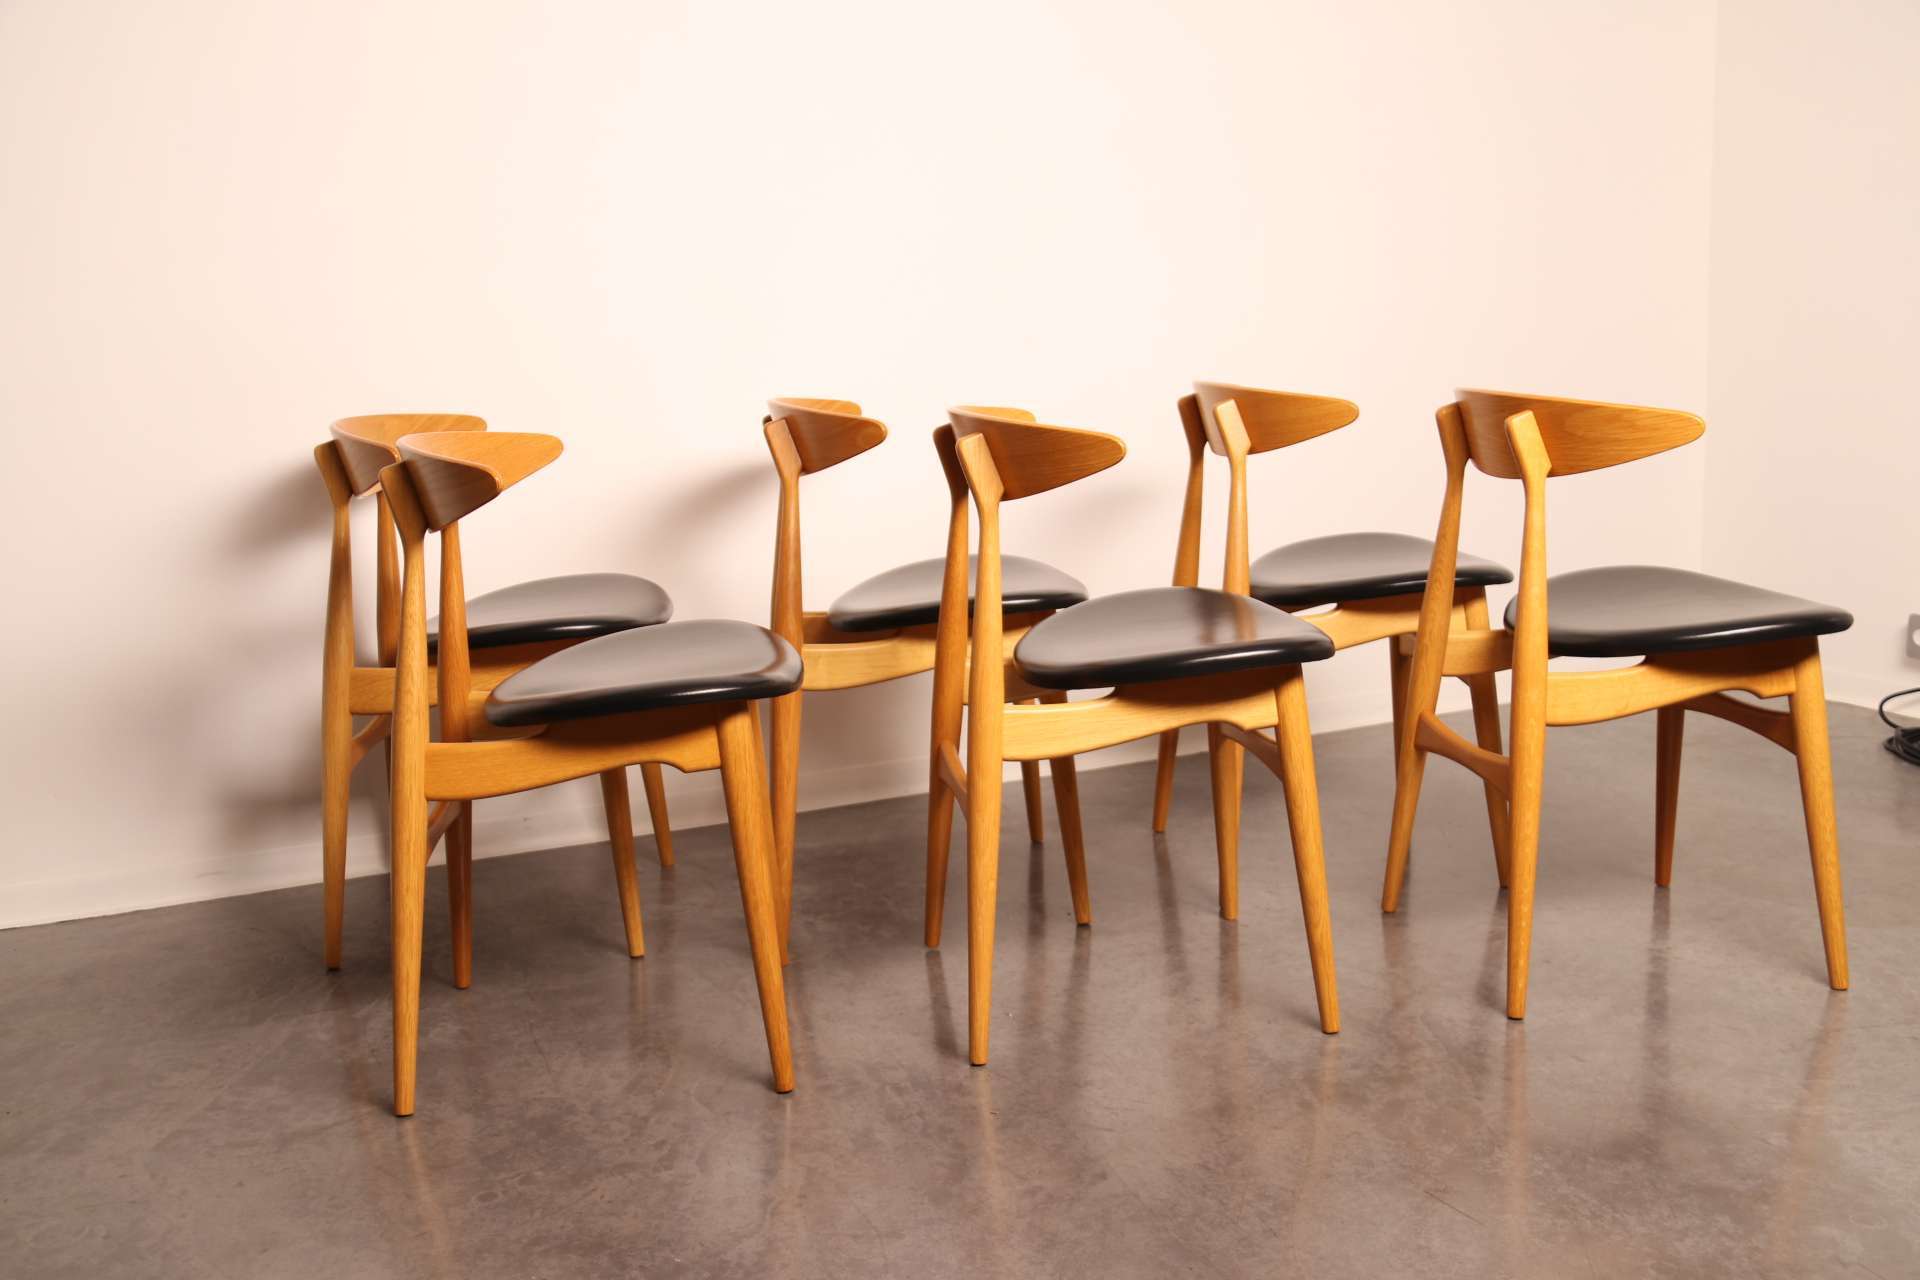 Iconic design scandinavian dining set oval table chairs Wegner (1)